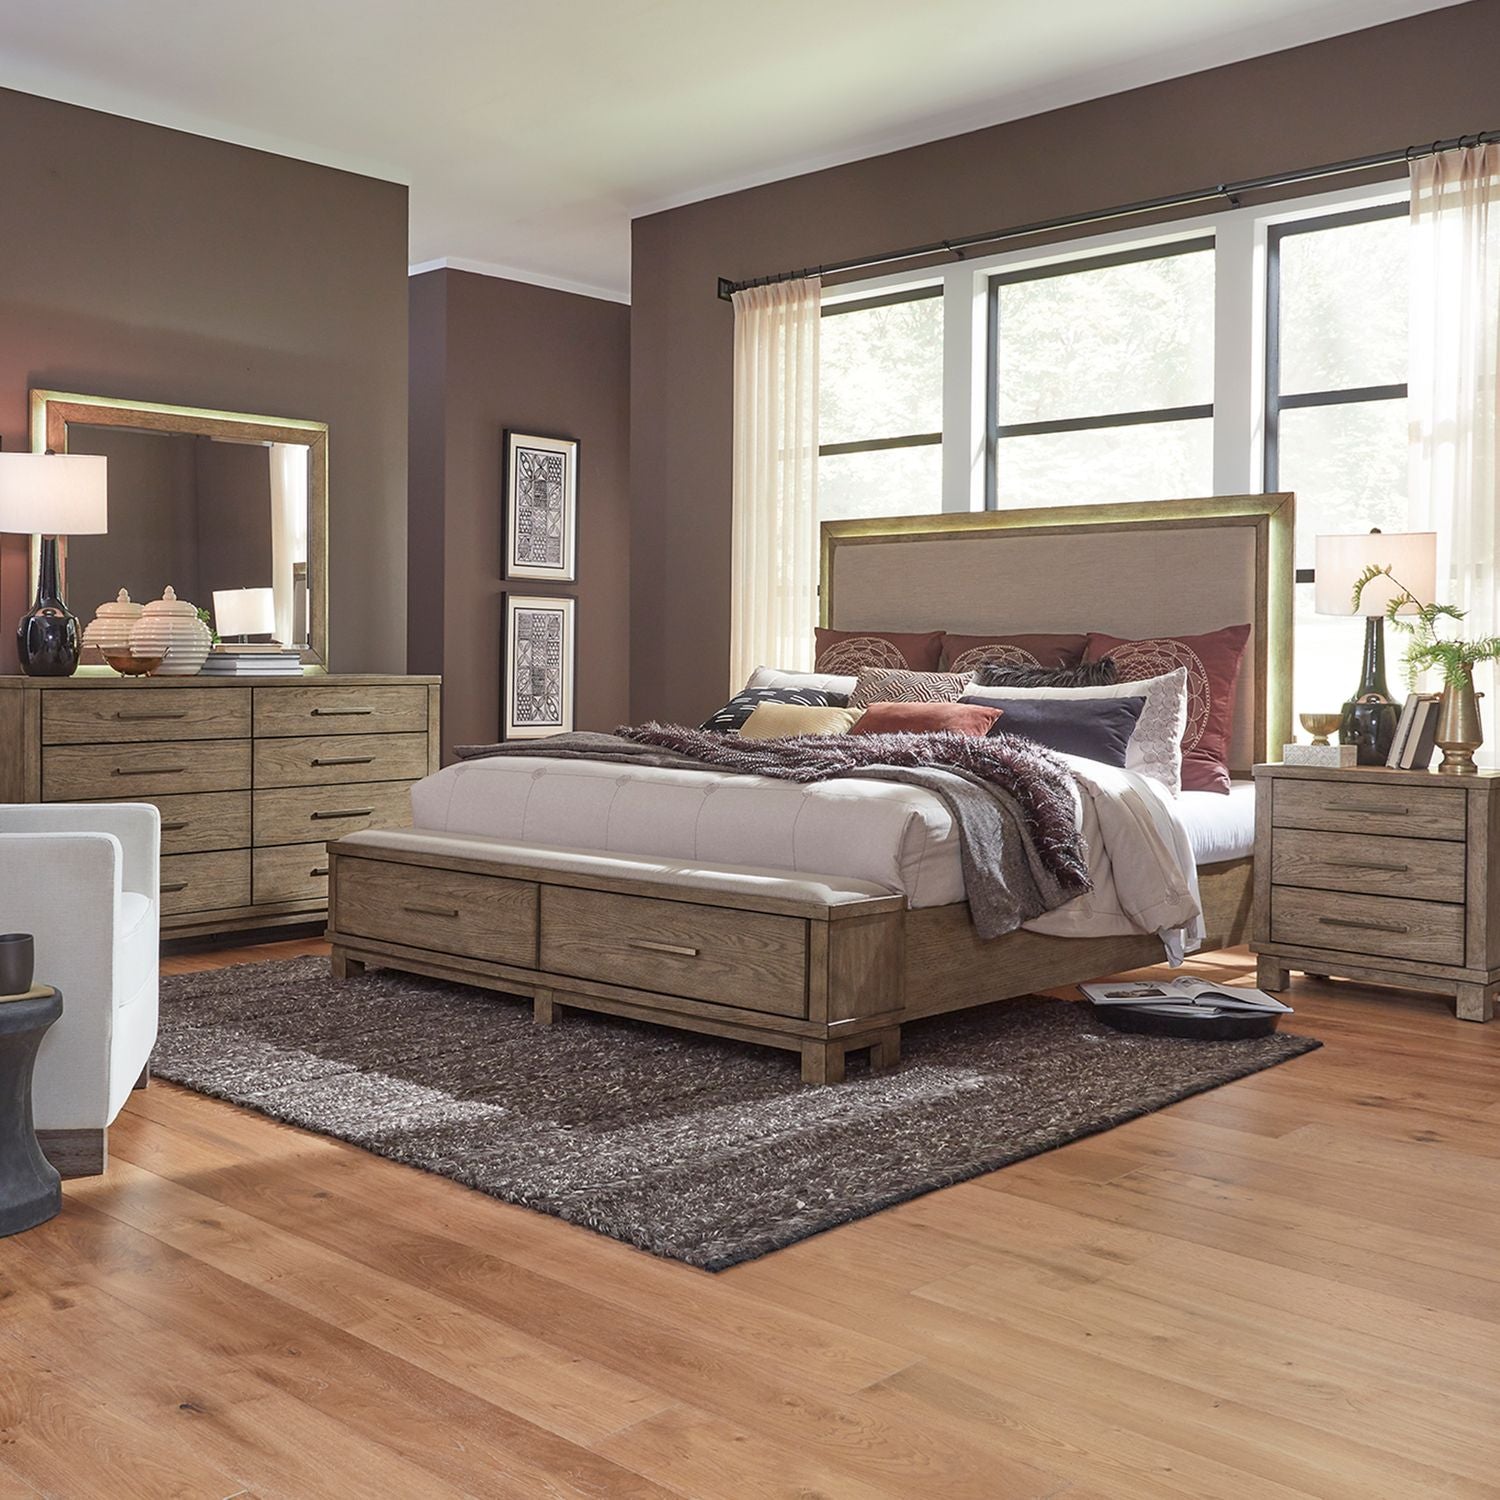 Canyon Road (876-BR) Bedroom Collection from Liberty Furniture